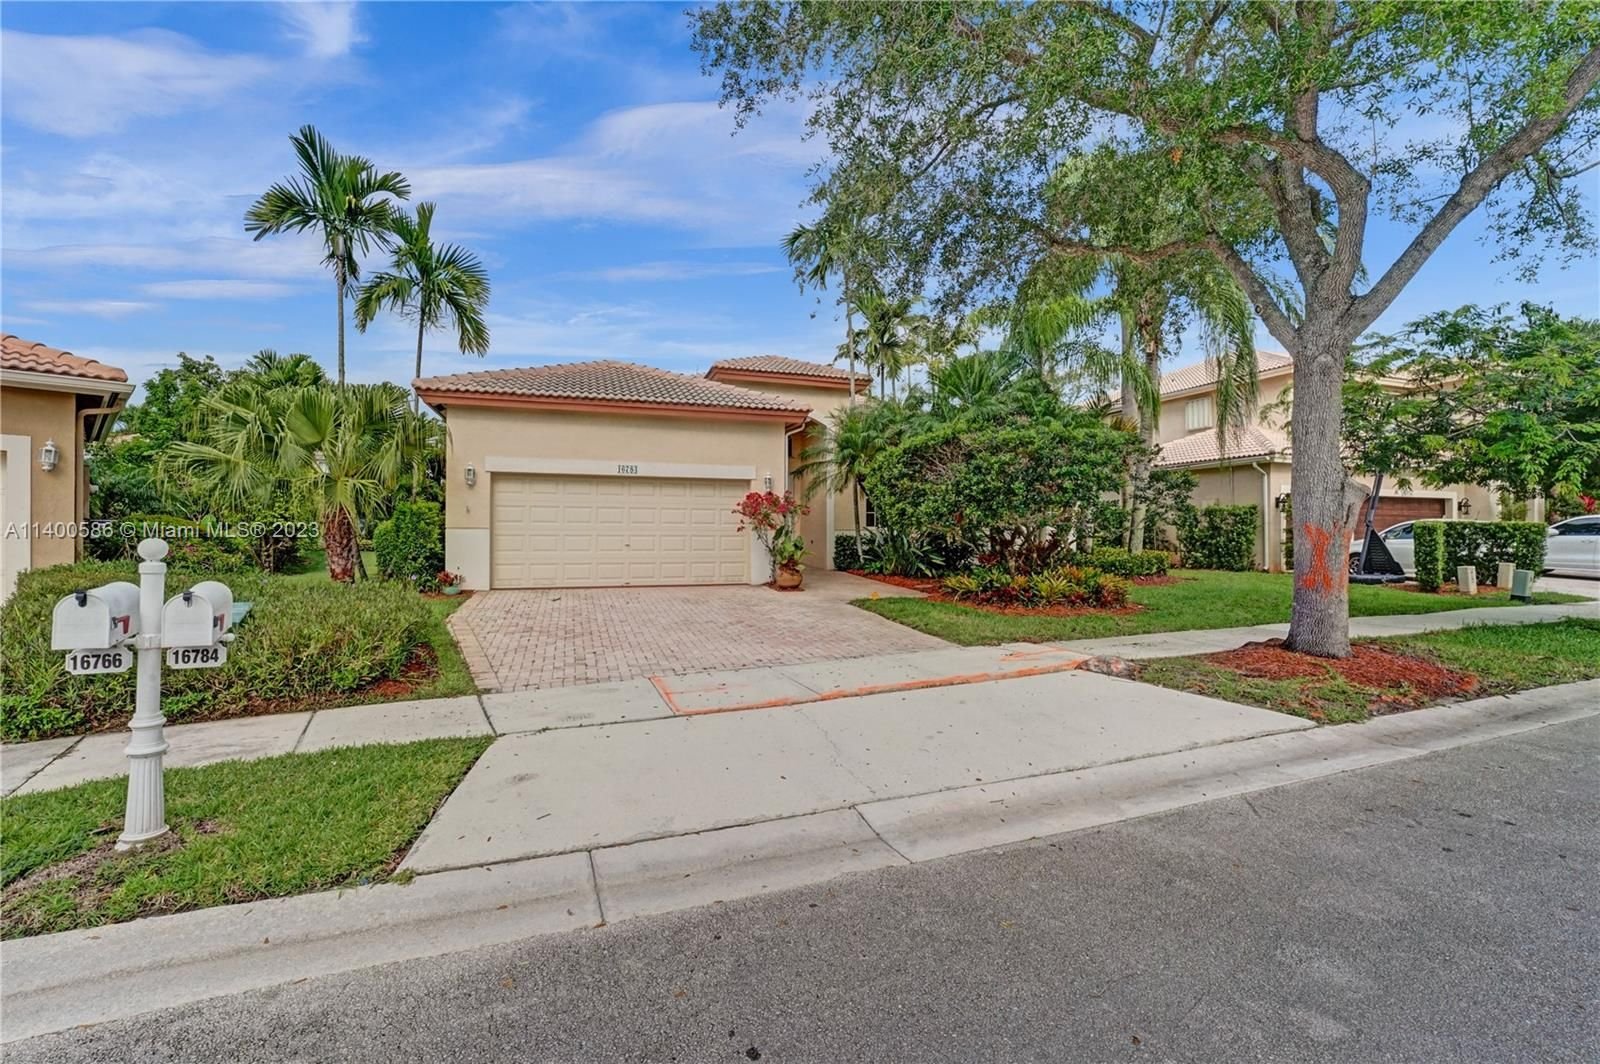 Real estate property located at 16784 15th St, Broward County, Pembroke Pines, FL